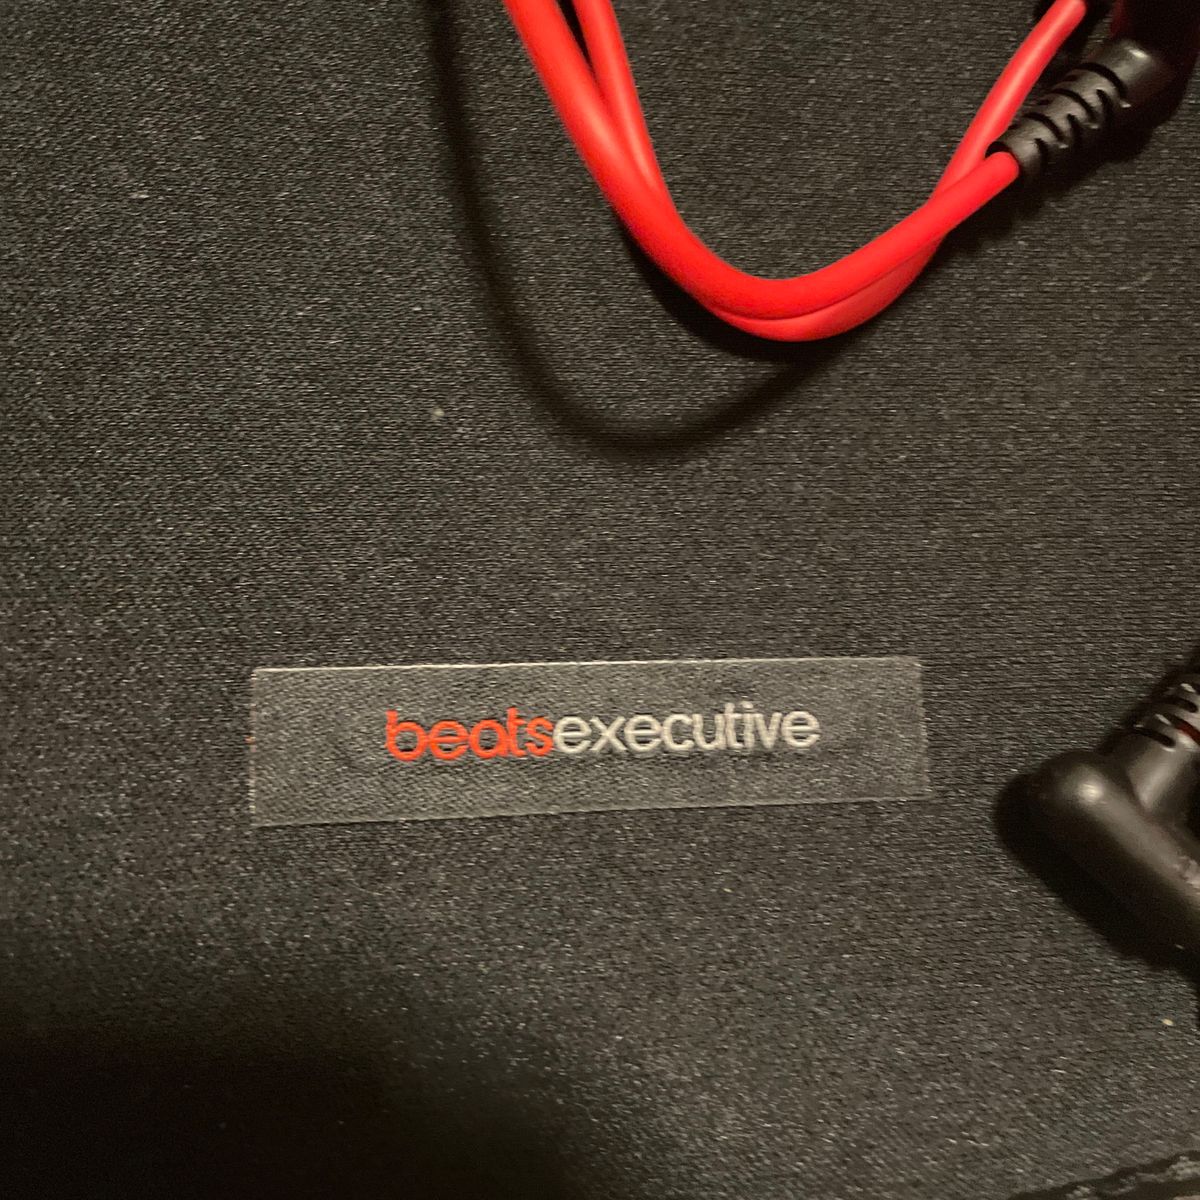 Beats by Dr.Dre executive ヘッドホン